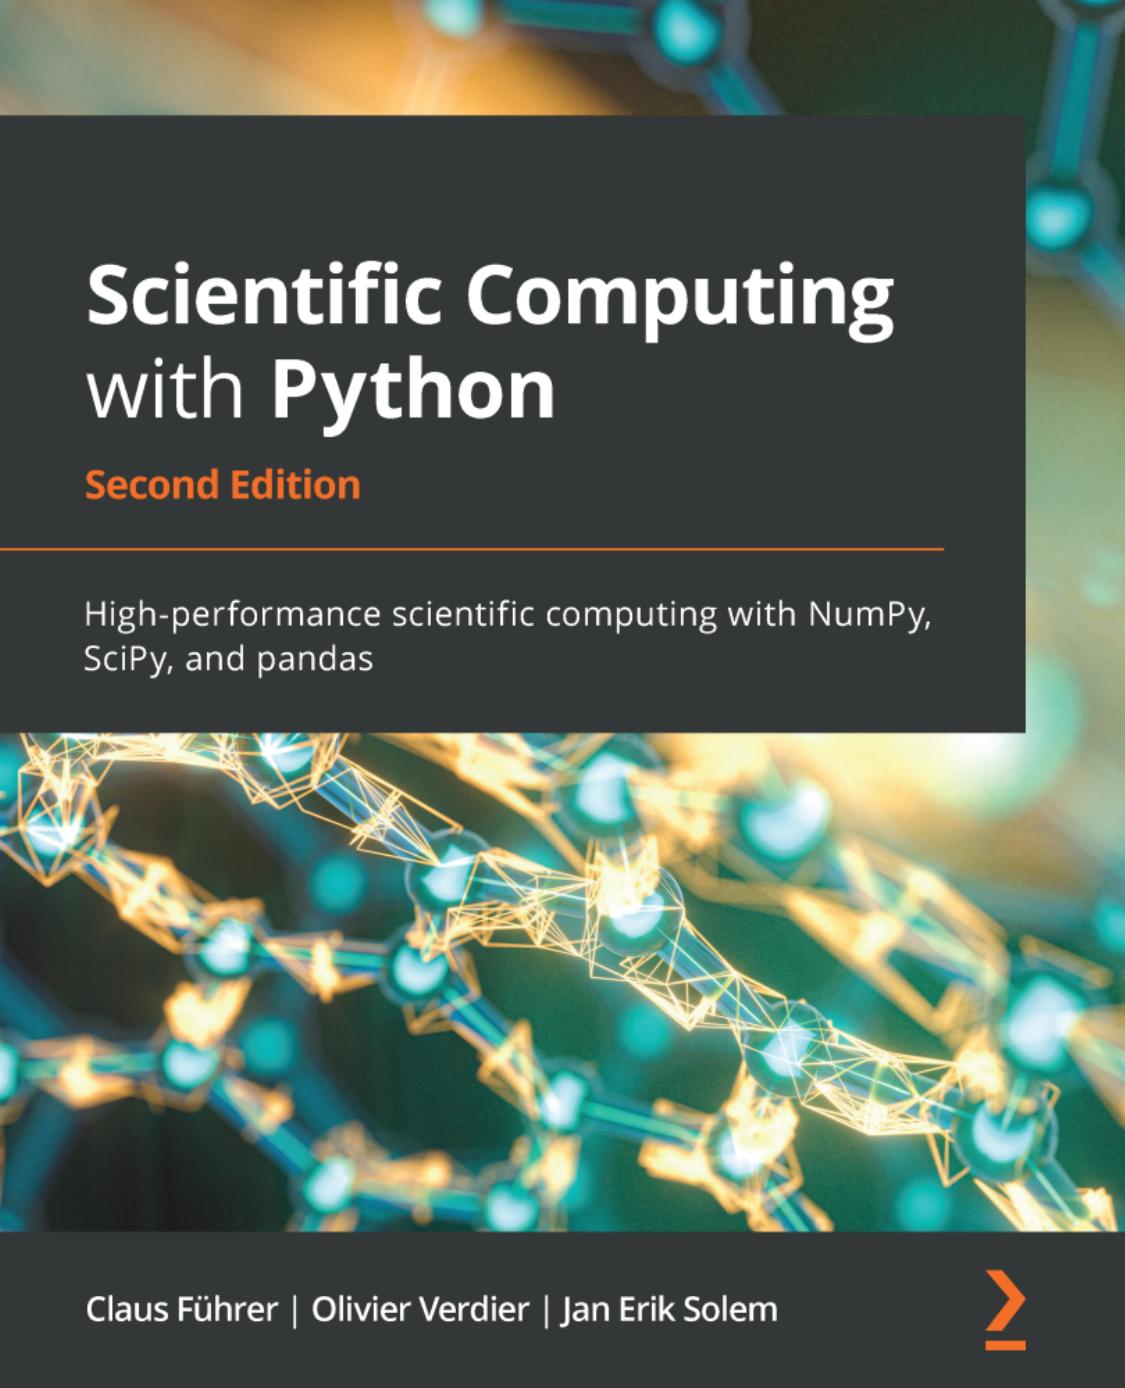 Scientific Computing with Python - Second Edition: High-Performance Scientific Computing with NumPy, SciPy, and Pandas